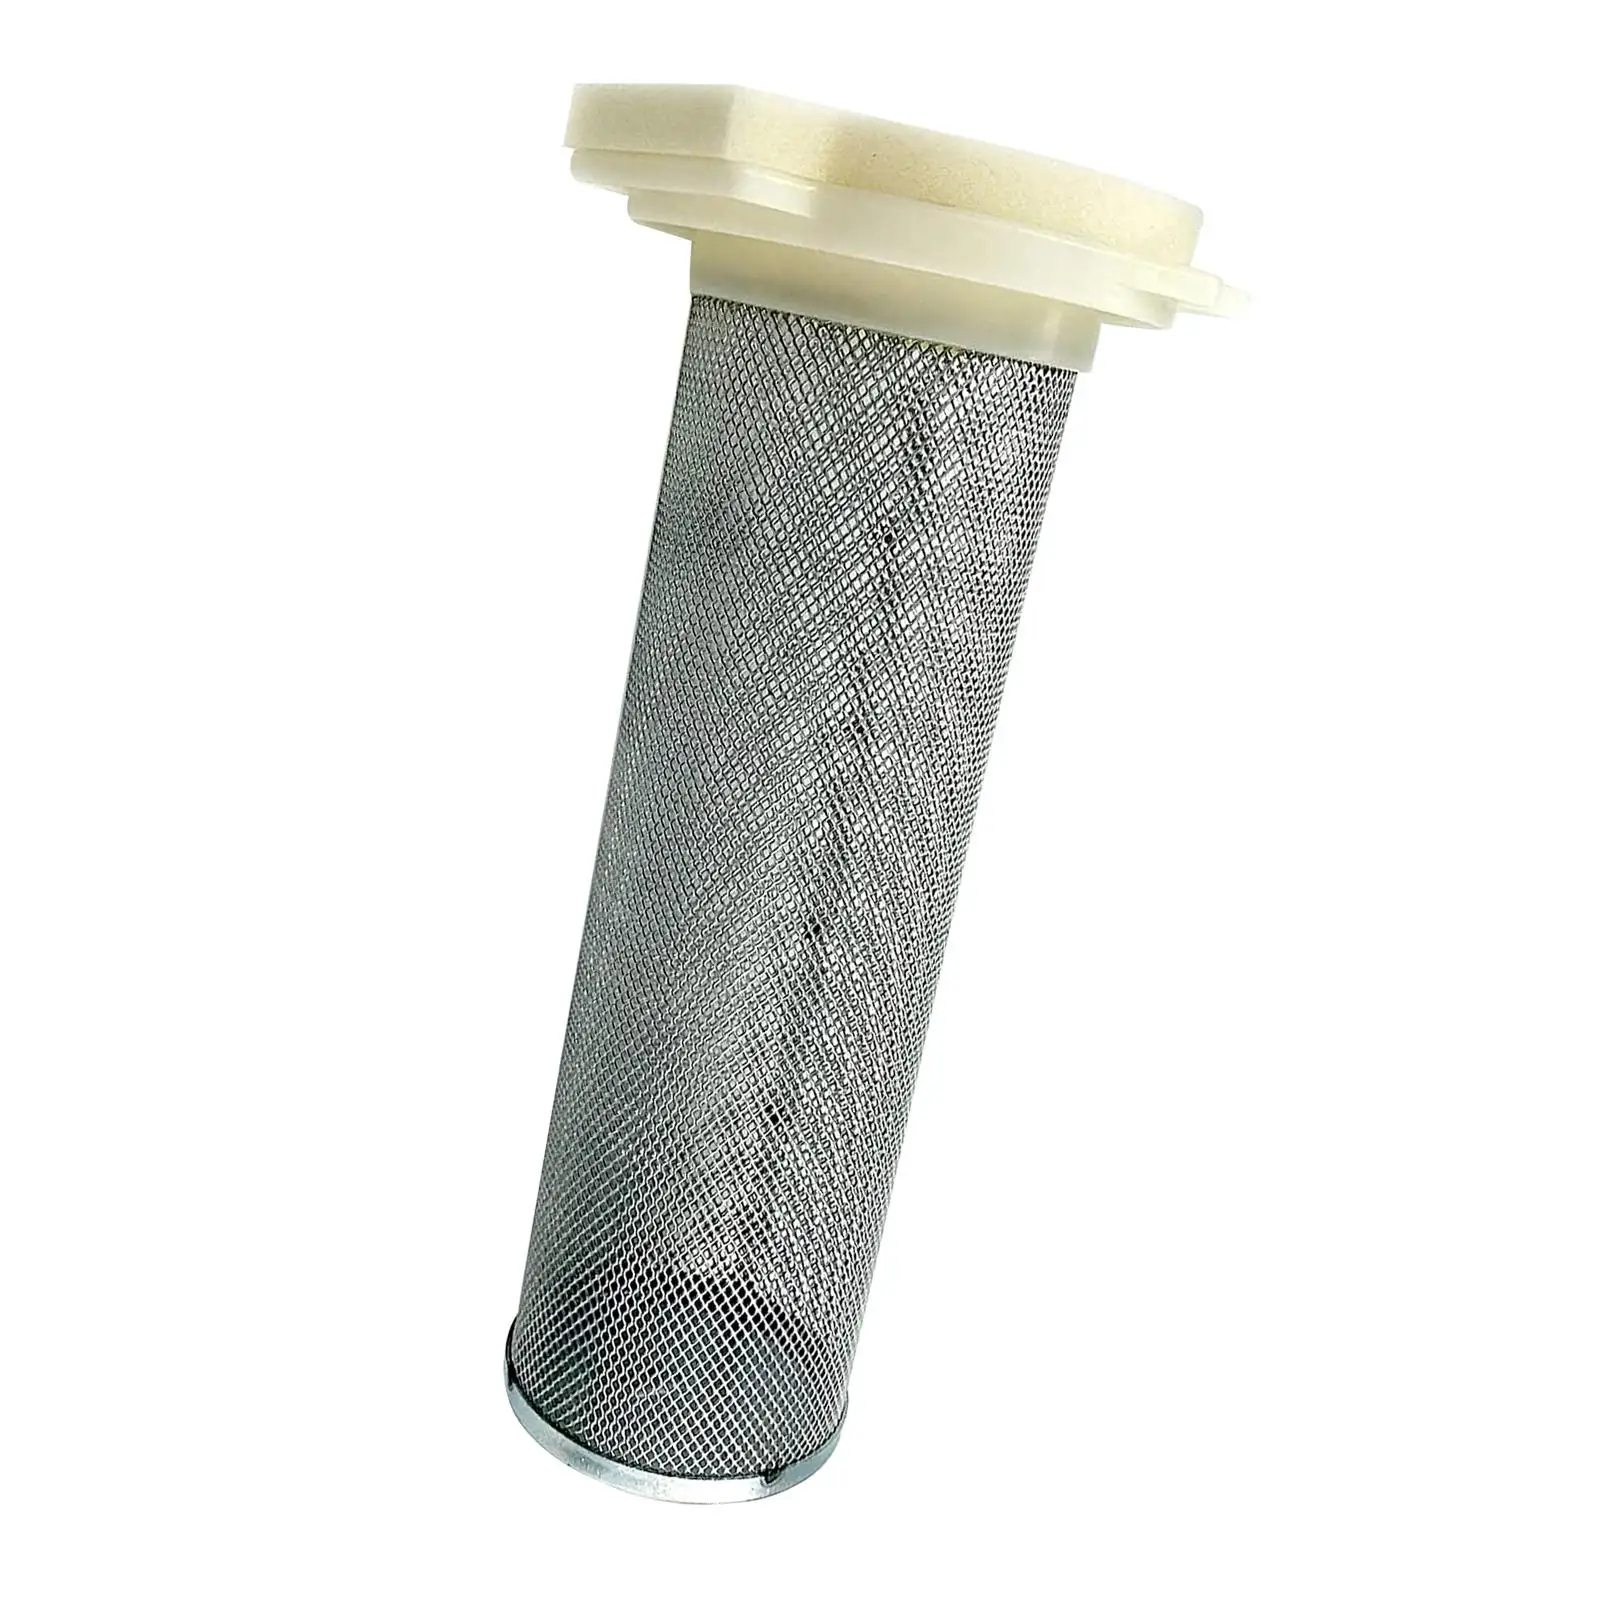 Air Filter Cage 1Uy-14458-01-00 for Yamaha Yfm 350 Spare Parts Replacement